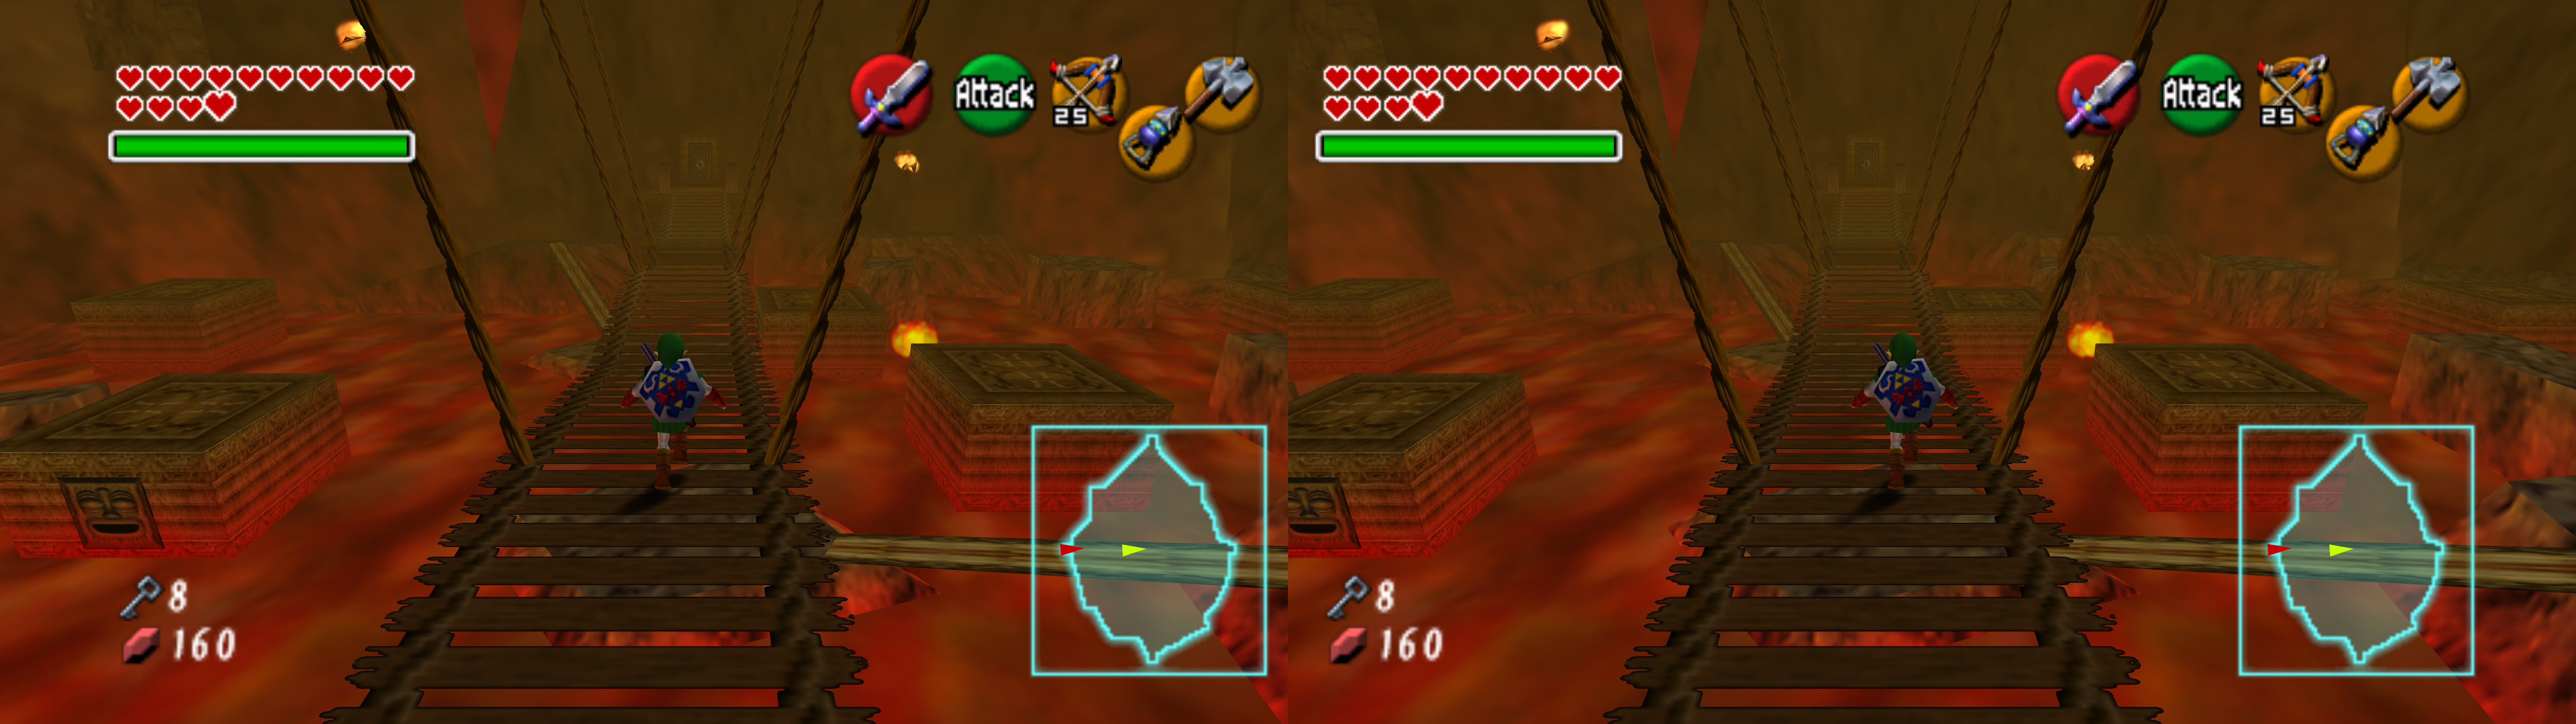 Is there an Ocarina of Time Switch port?